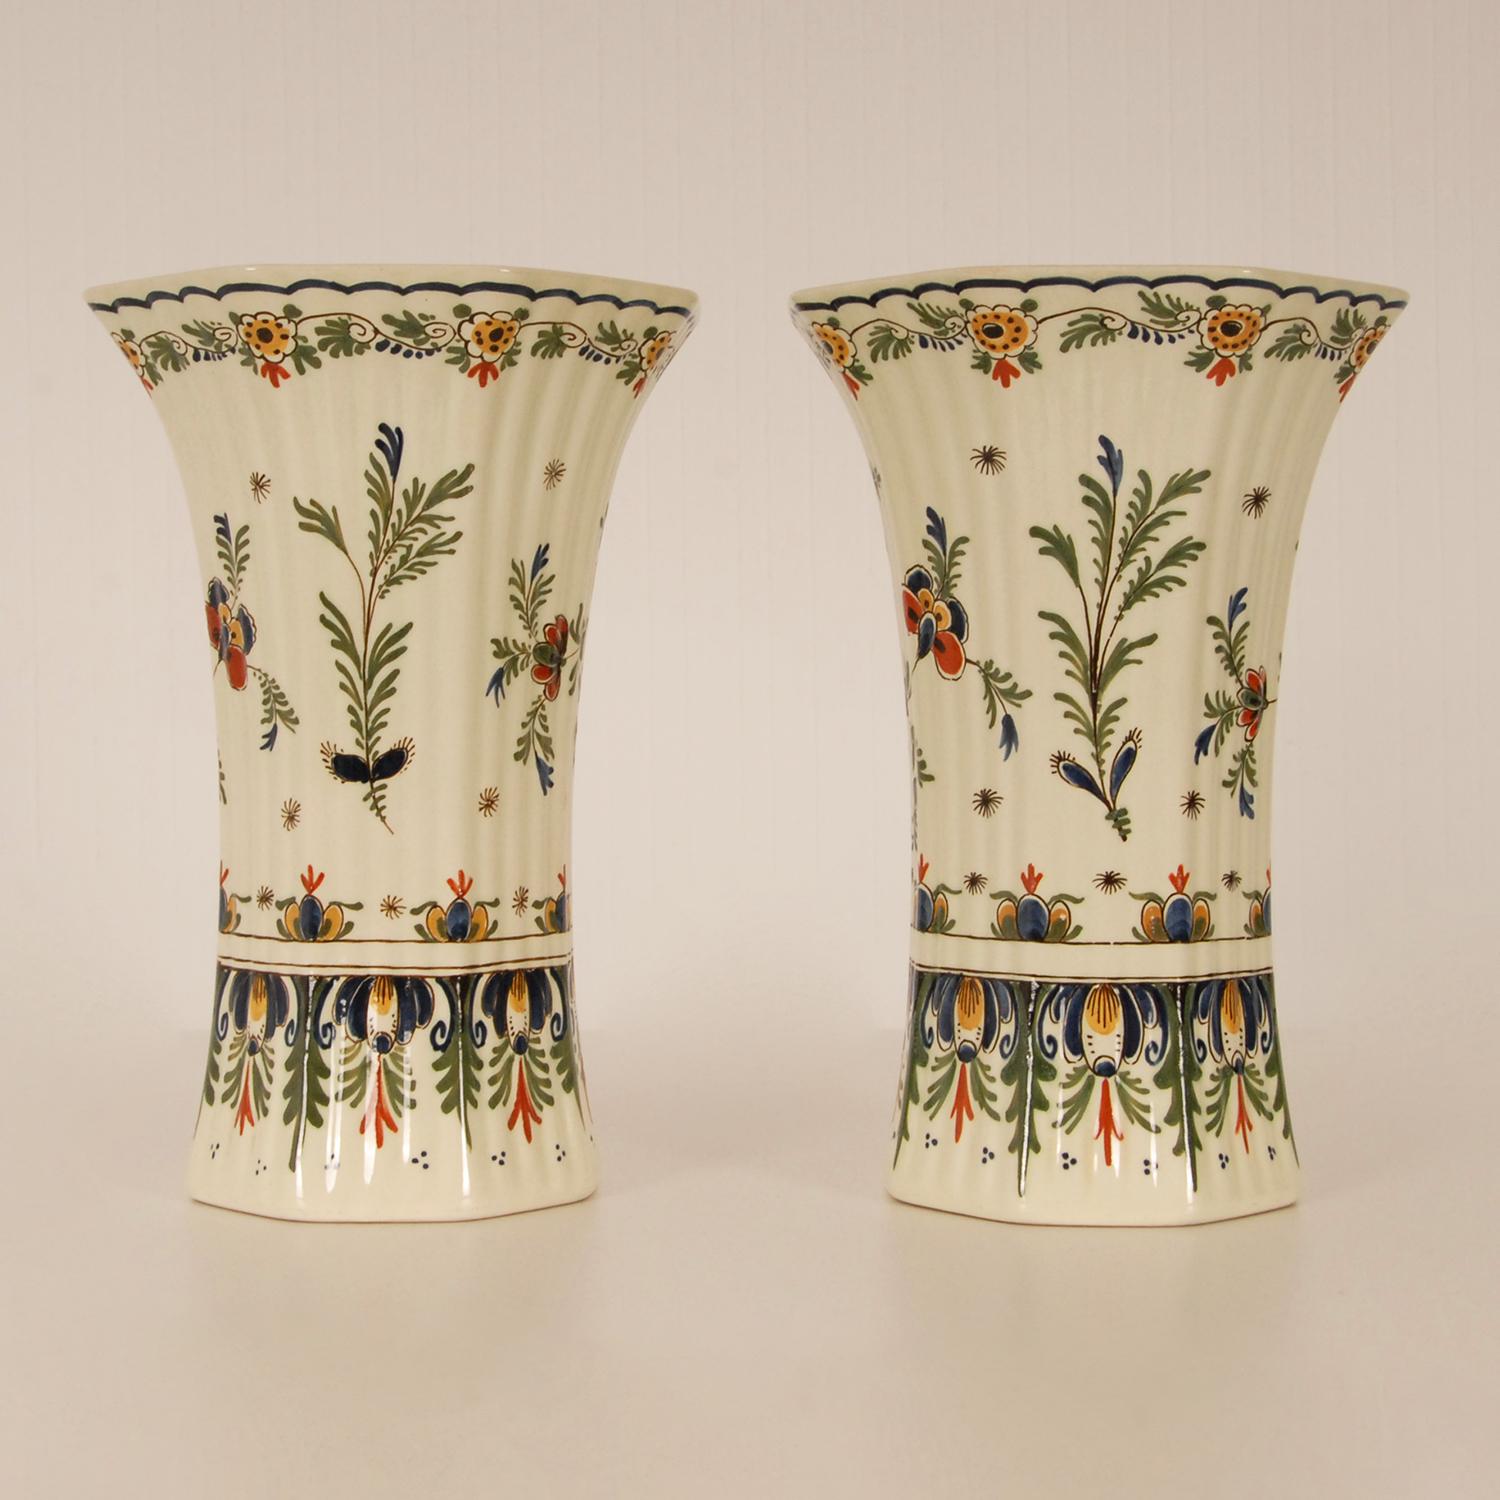 Hand-Crafted Royal Delft Beaker Vases Earthenware Dutch Polychrome Delftware Vases a Pair For Sale